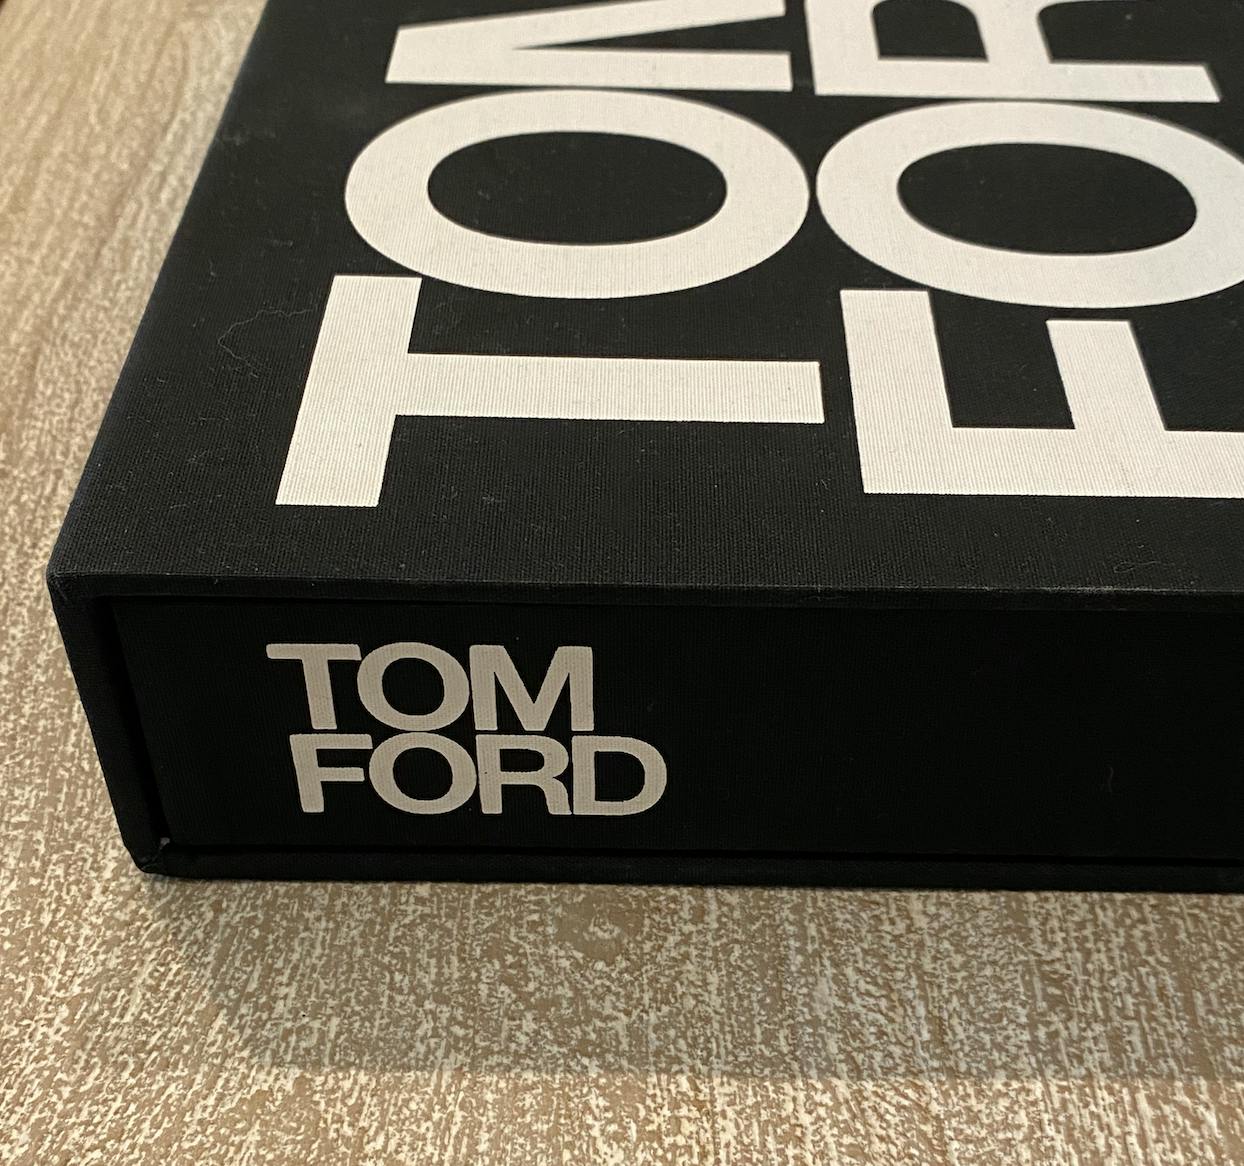 Buy Tom Ford Book Online at Low Prices in India